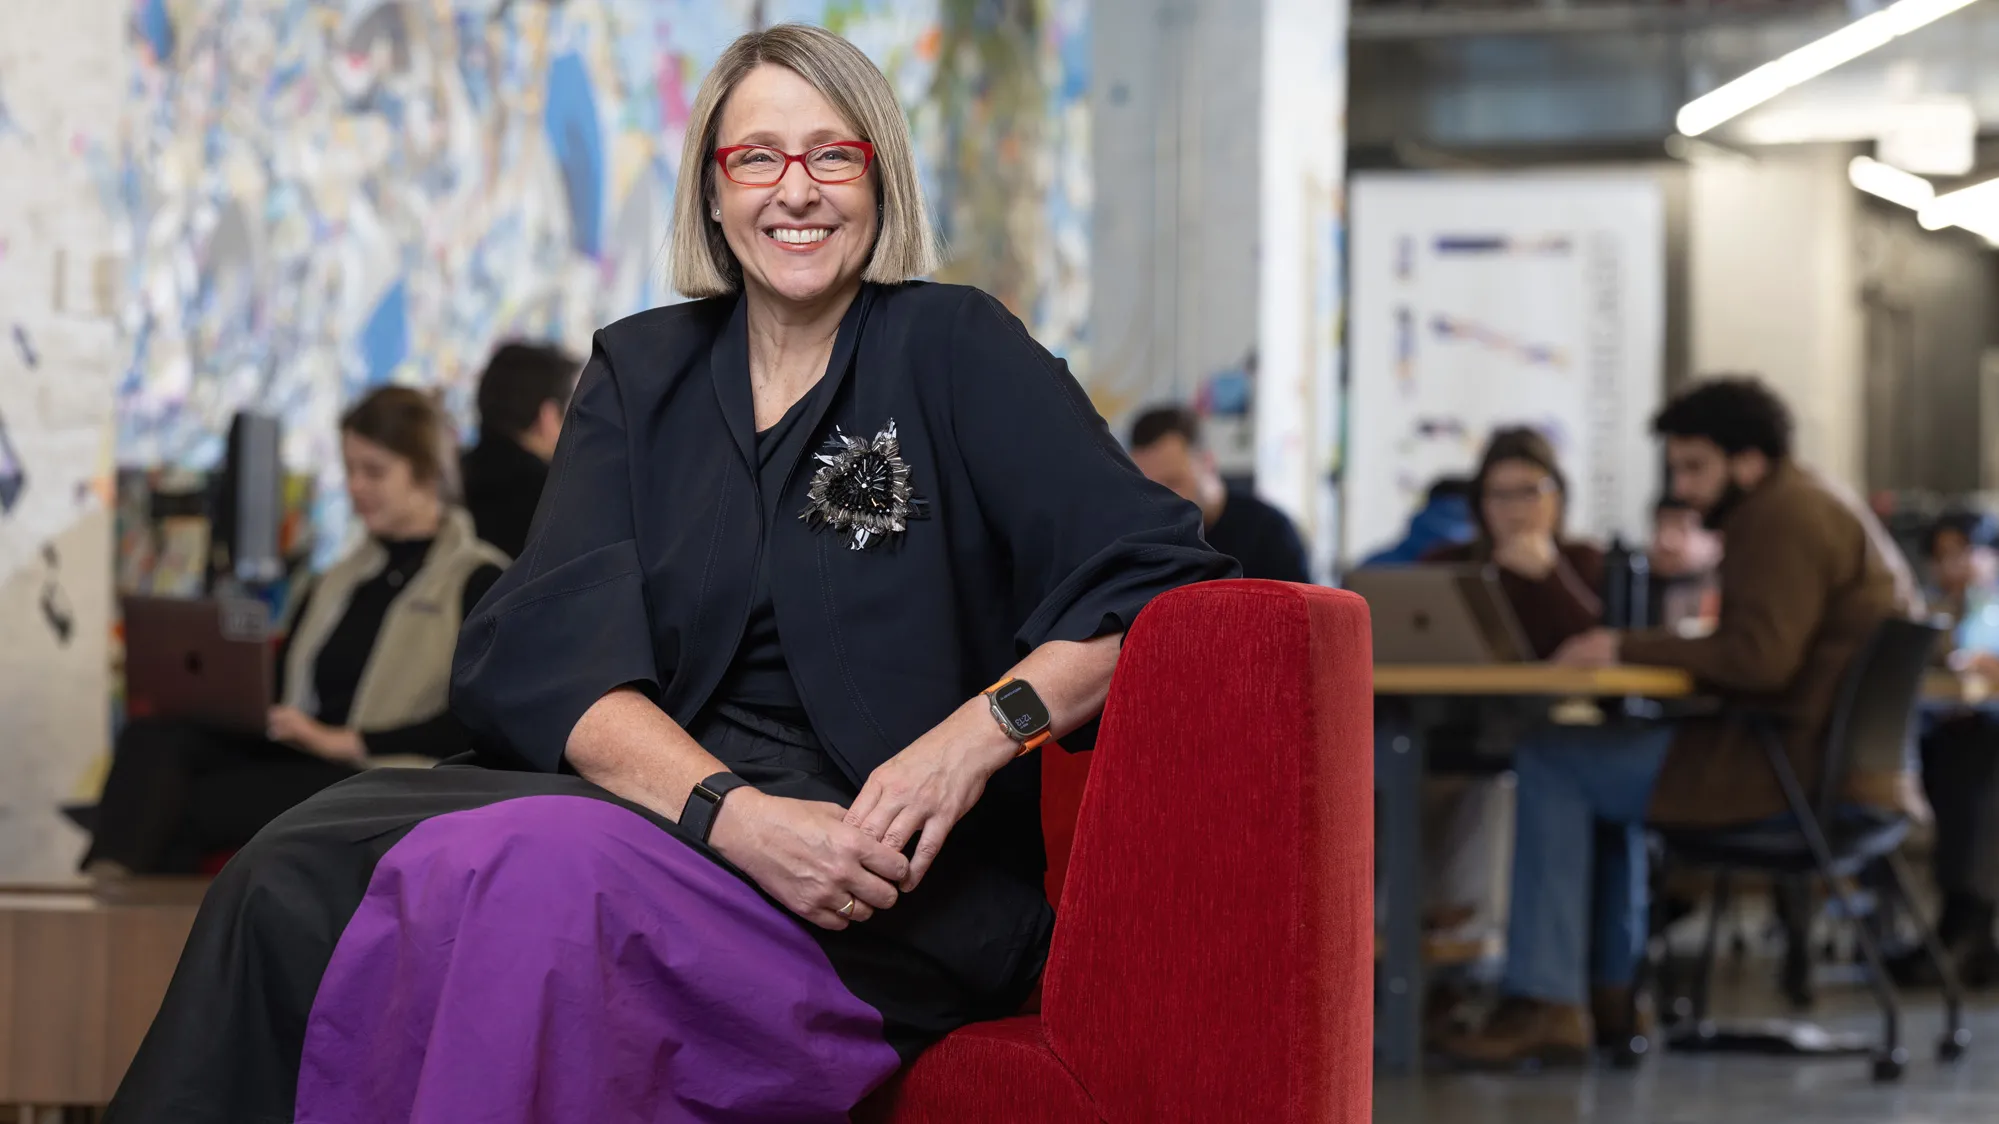 Betsy Ziegler sits on a modern upholstered chair in a space where many people in the background work or chat at small tables. A wall-size painting in the background adds to the lively feel of the scene, while Betsy poses with a genuine smile at the center of it. The middle-age white woman looks comfortable and stylish, with a chin-length haircut, stand-out glasses, modern-shaped clothes and a striking beaded broach that shines but also looks organically shaped.